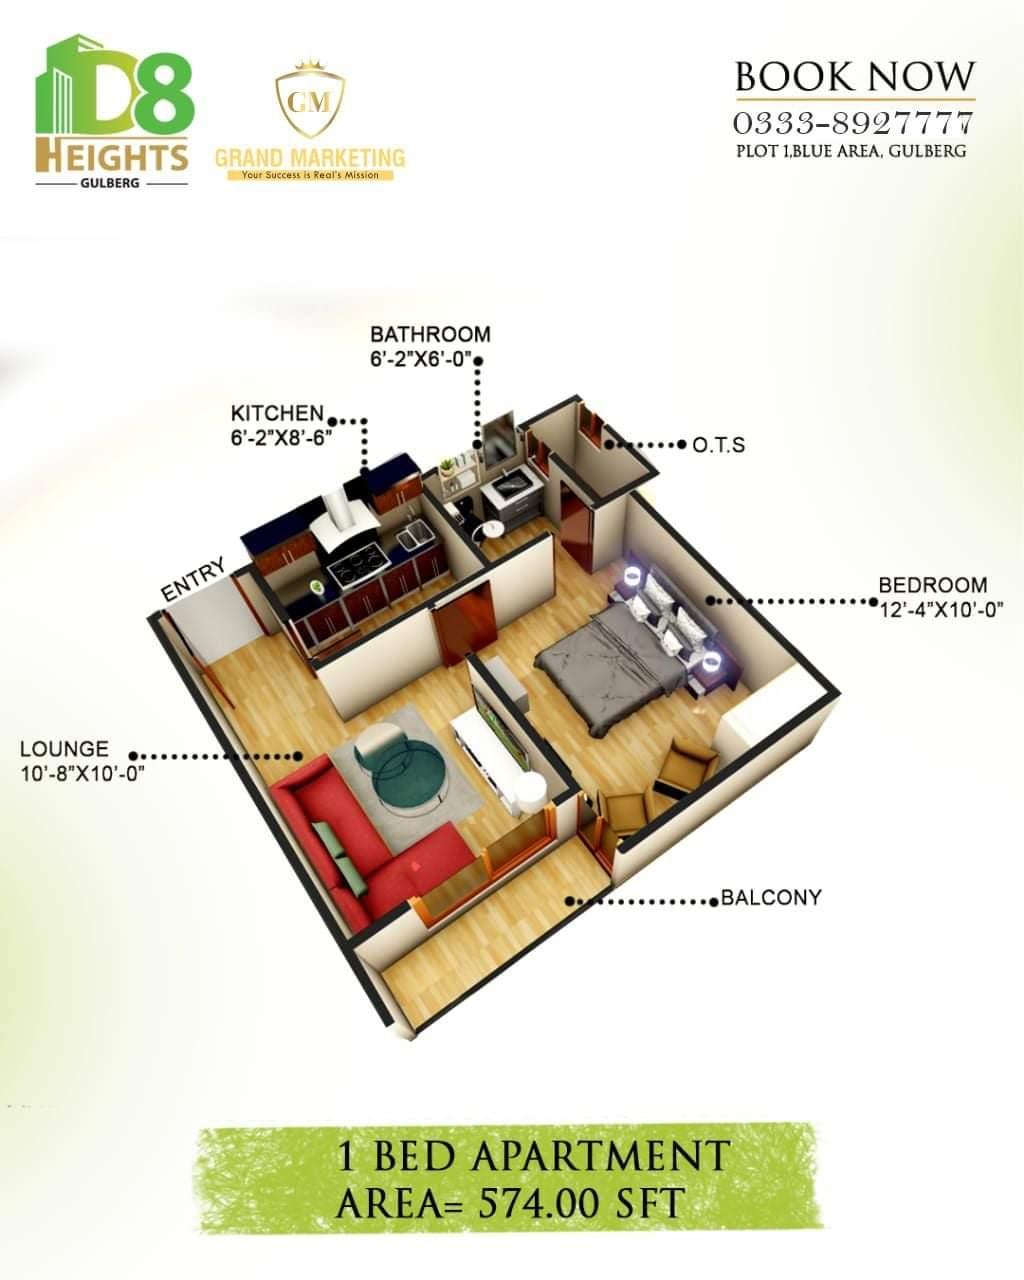 1 Bedroom Apartment D8 Heights Gulberg Islamabad